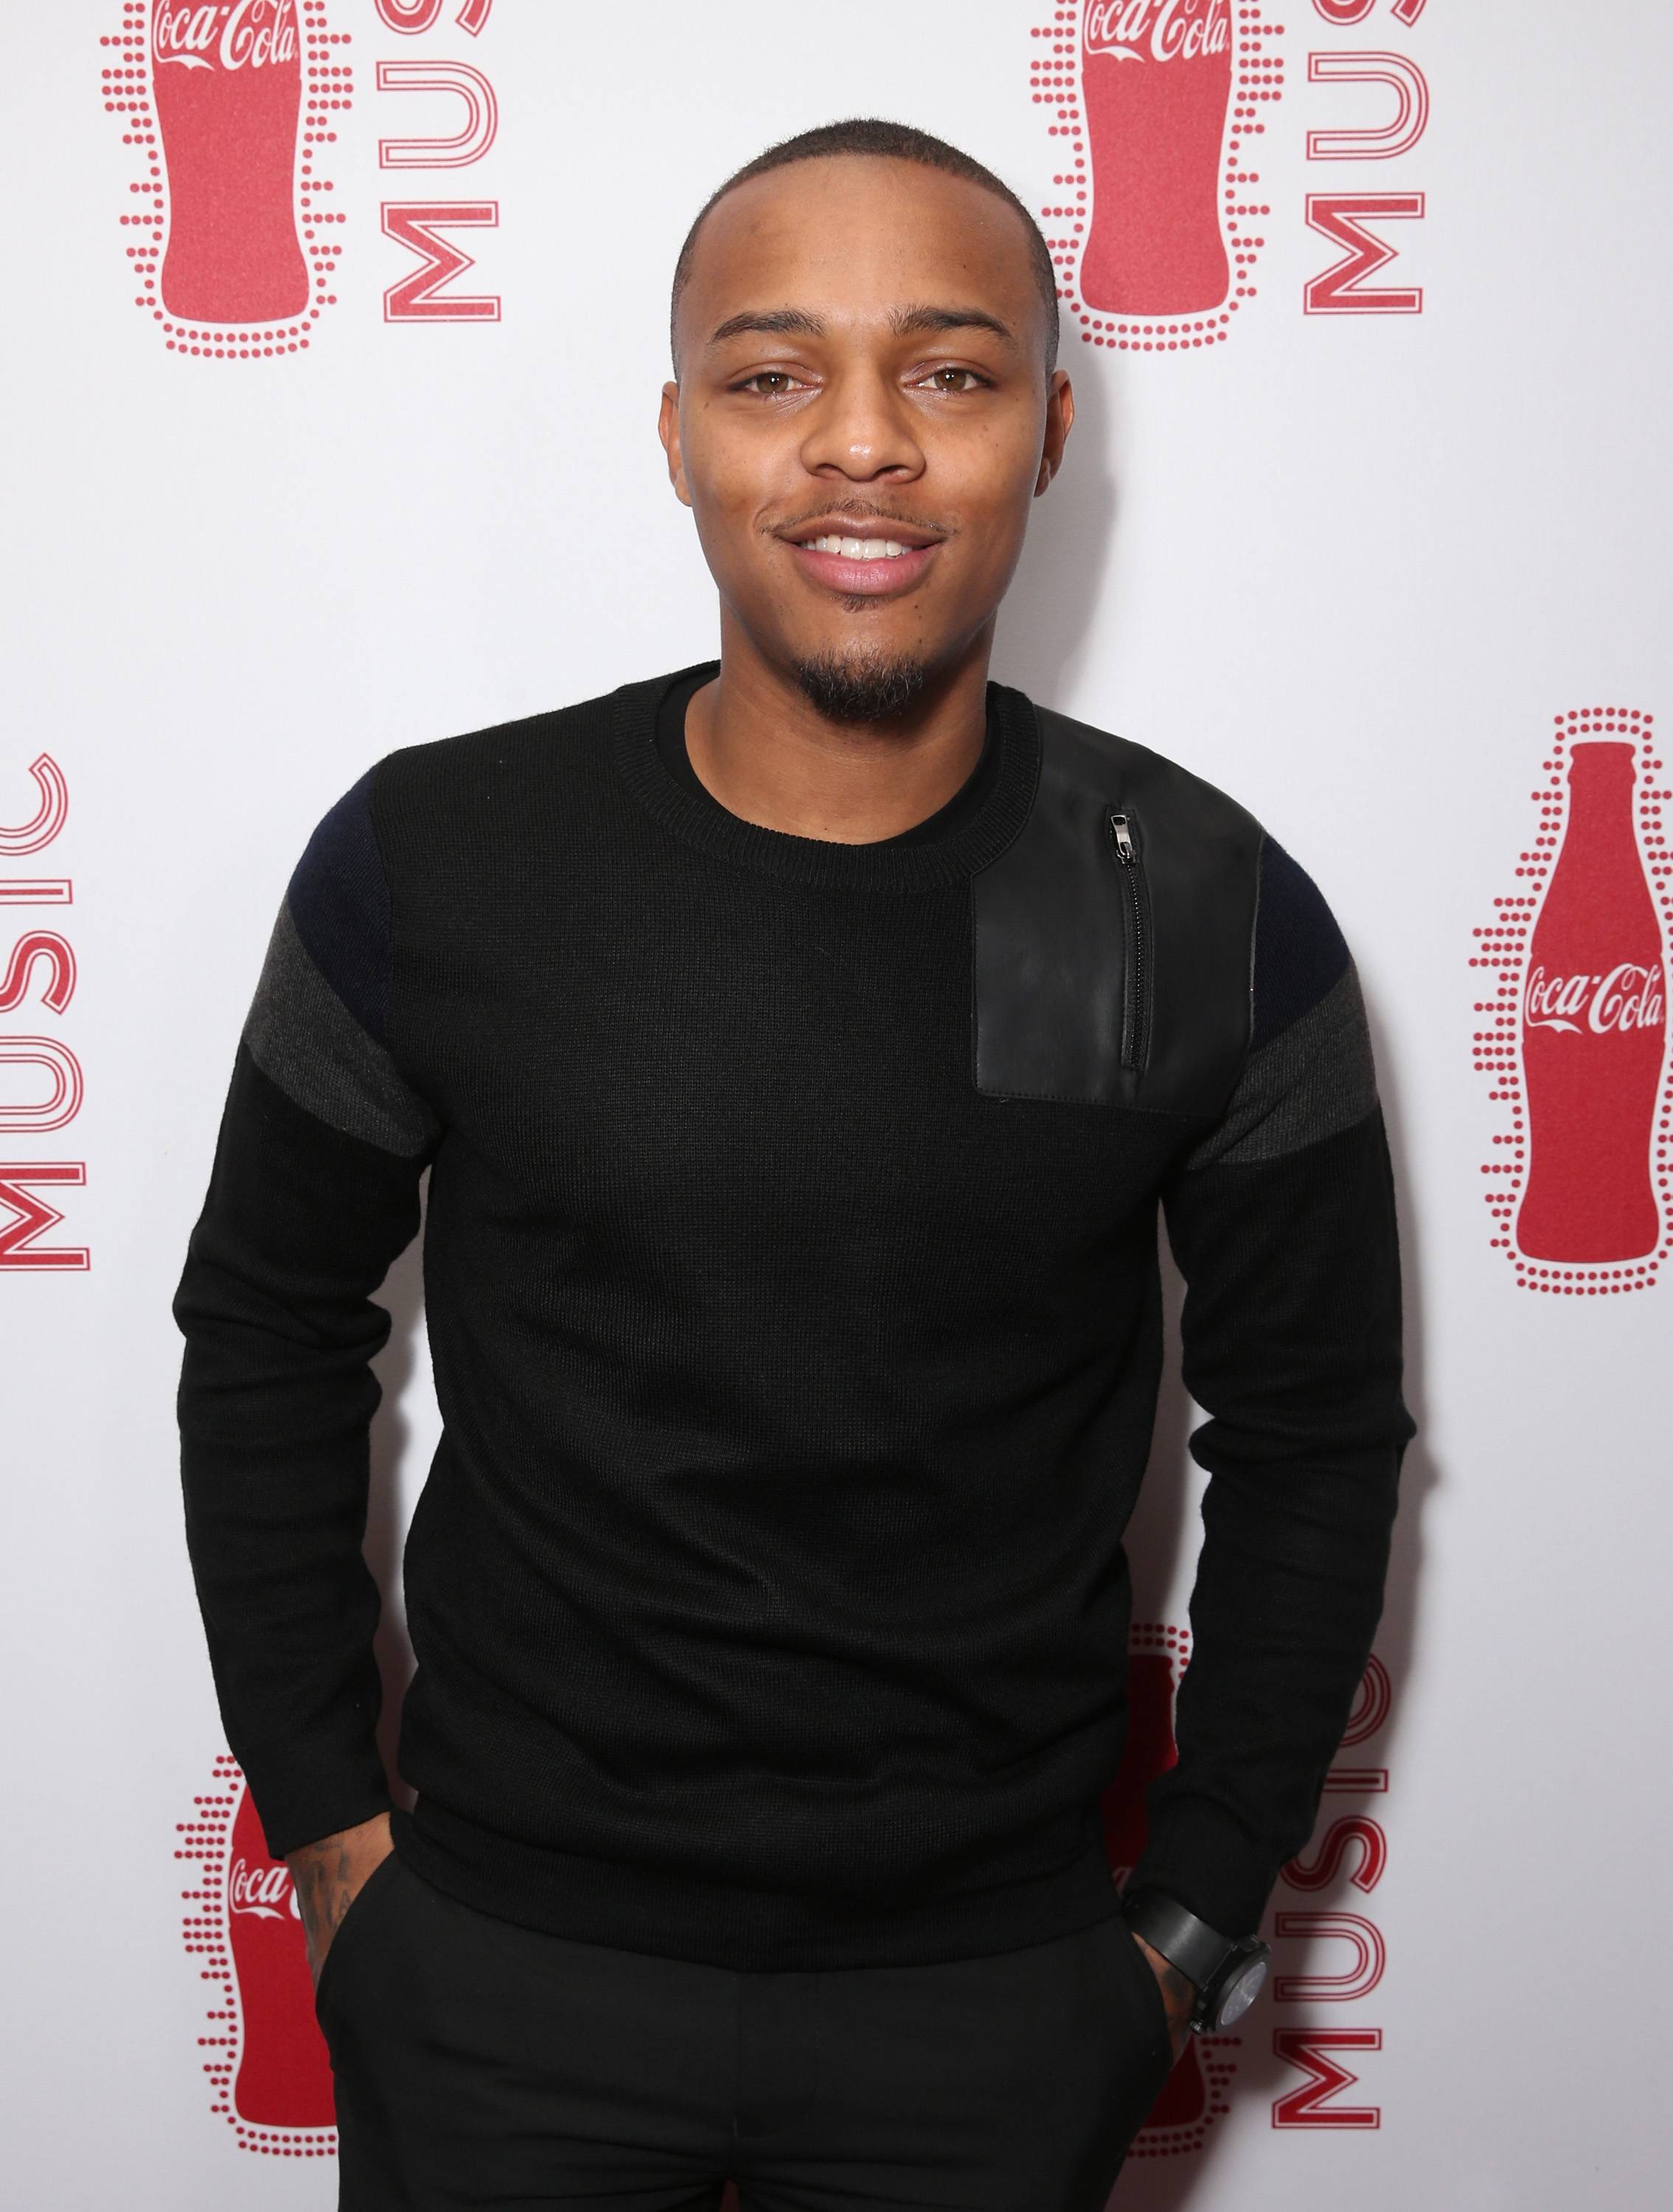 How Bow Wow Energized a New Generation of NBA Fans with 'Like Mike